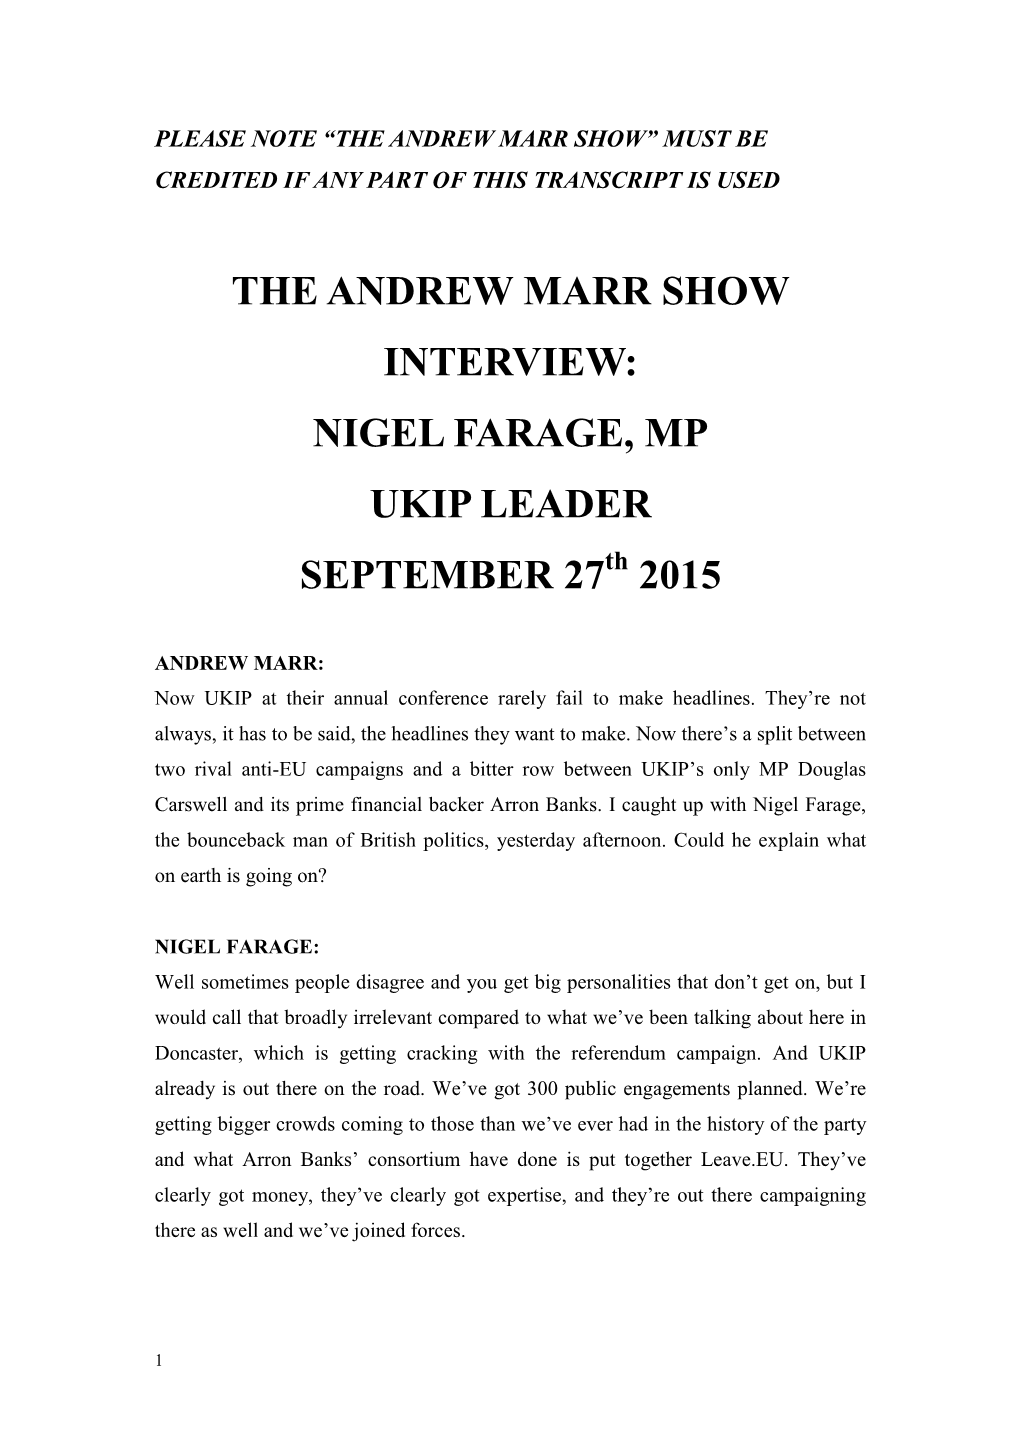 THE ANDREW MARR SHOW INTERVIEW: NIGEL FARAGE, MP UKIP LEADER SEPTEMBER 27Th 2015